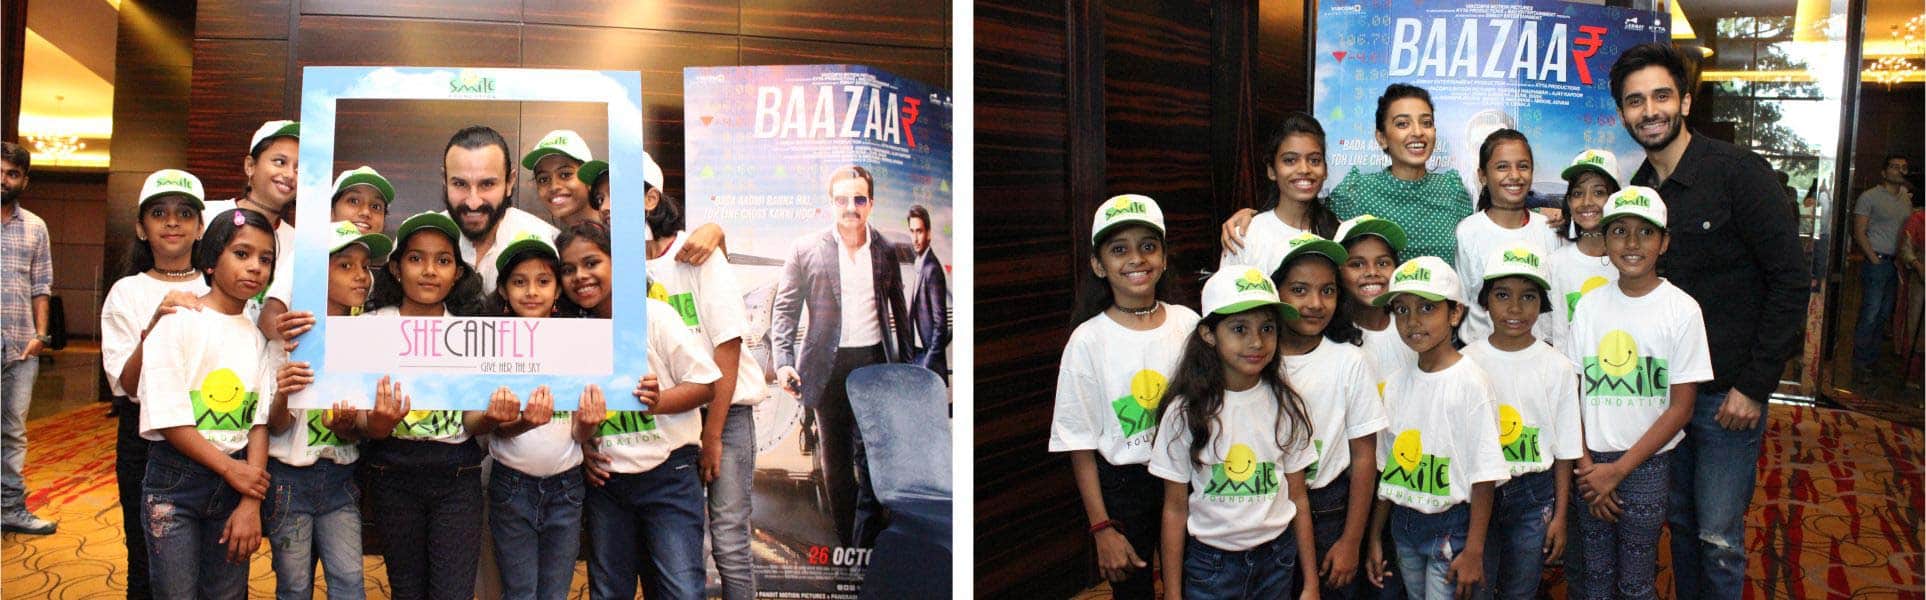 Baazar movie joins hands with Smile Foundation for the cause of child education